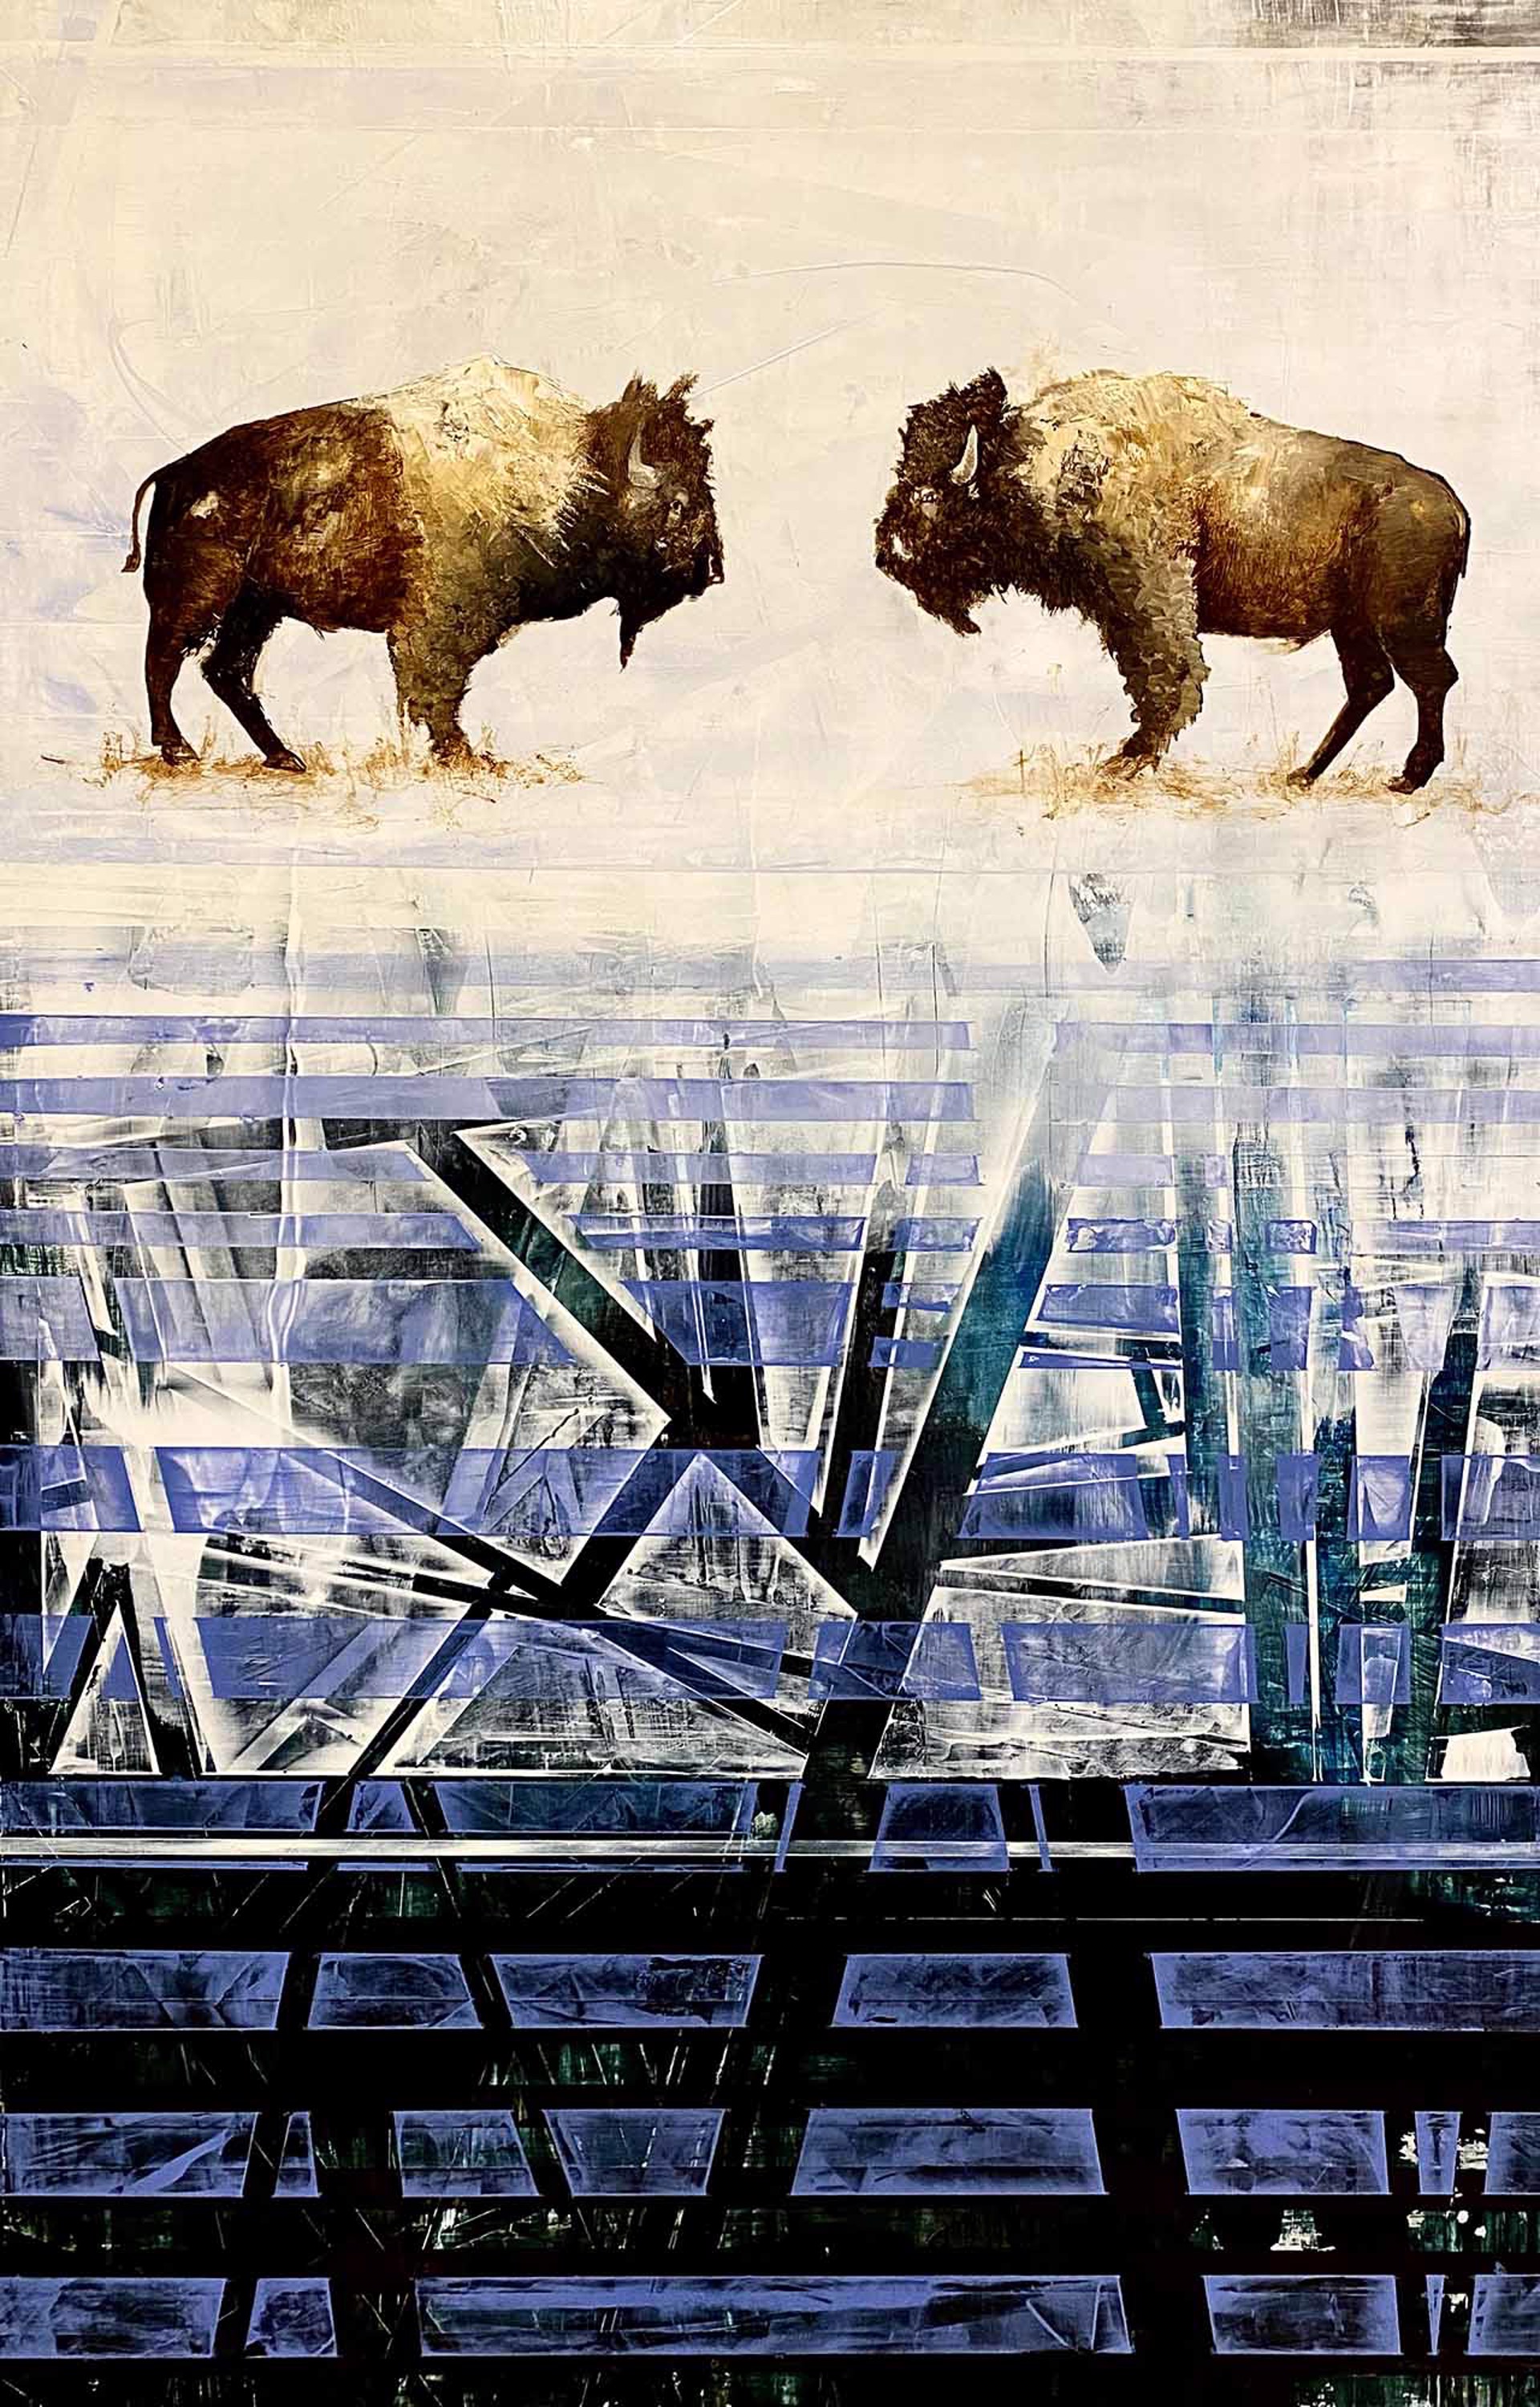 Oil Painting Of Two Bison Facing Each Other Featuring A Contemporary Line Patterned Blue Background, By Jenna Von Benedikt